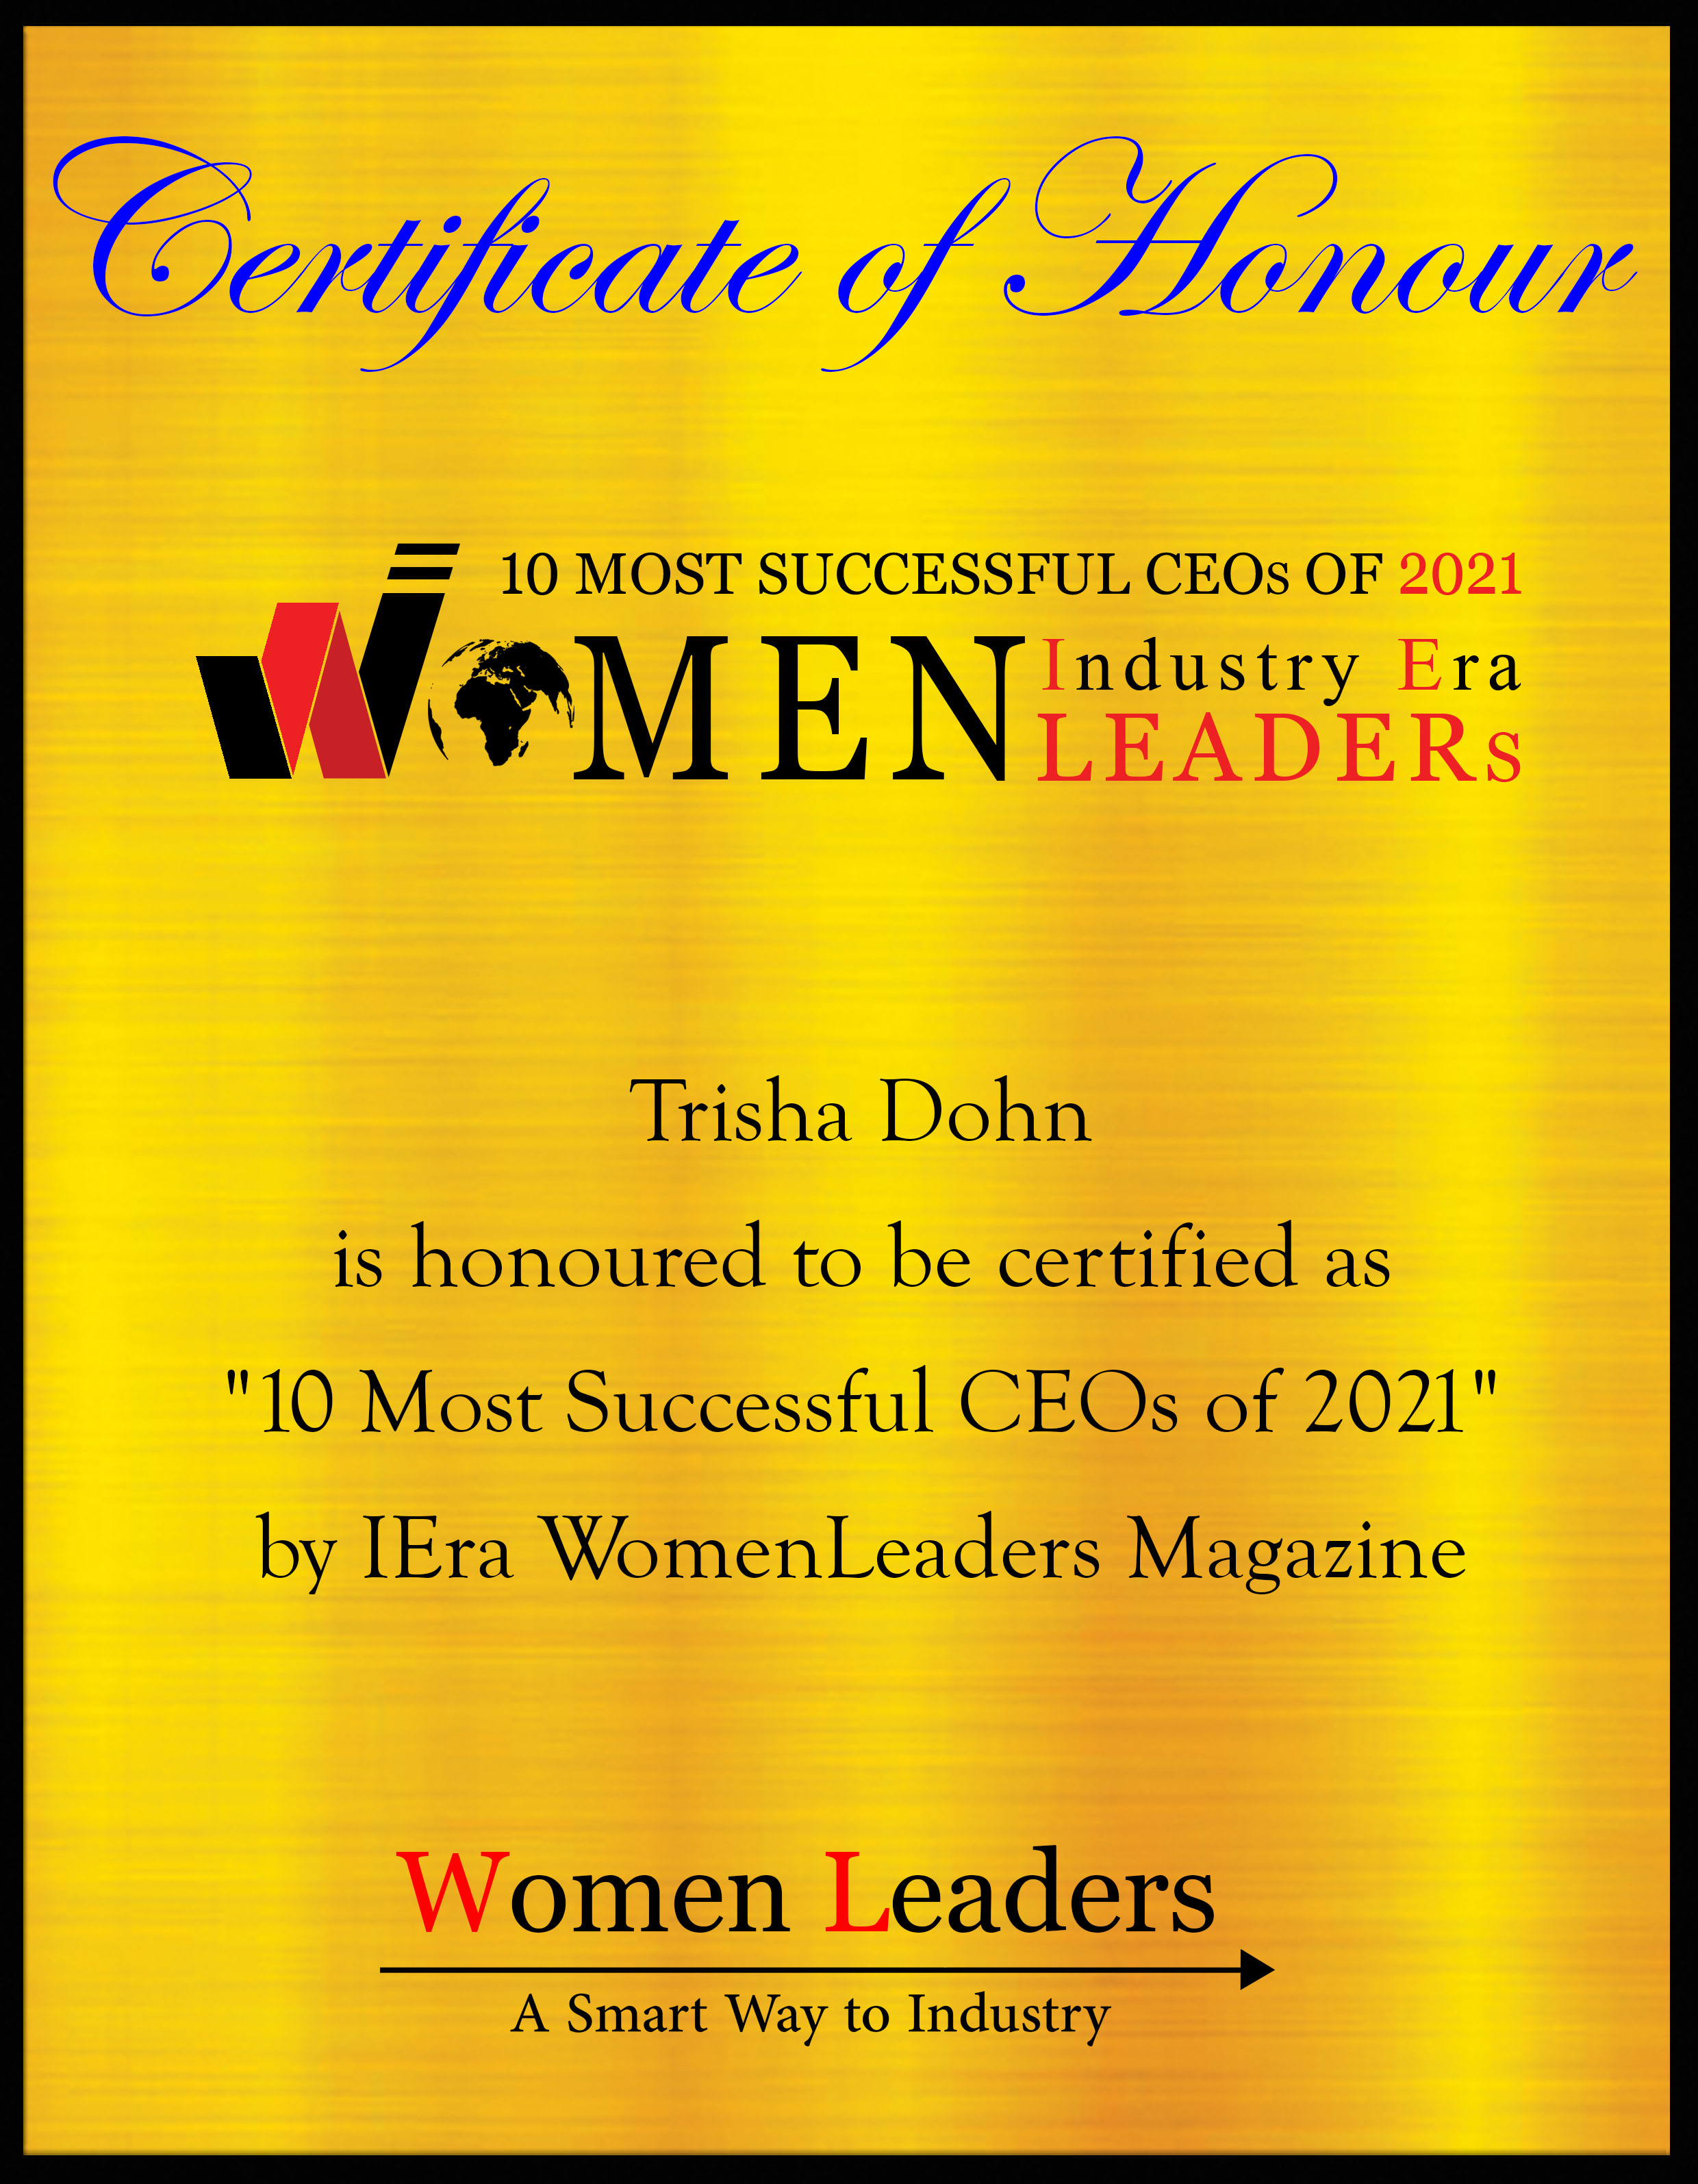 Trisha Dohn Founder and CEO of Well365, Best Successful CEOs of 2021